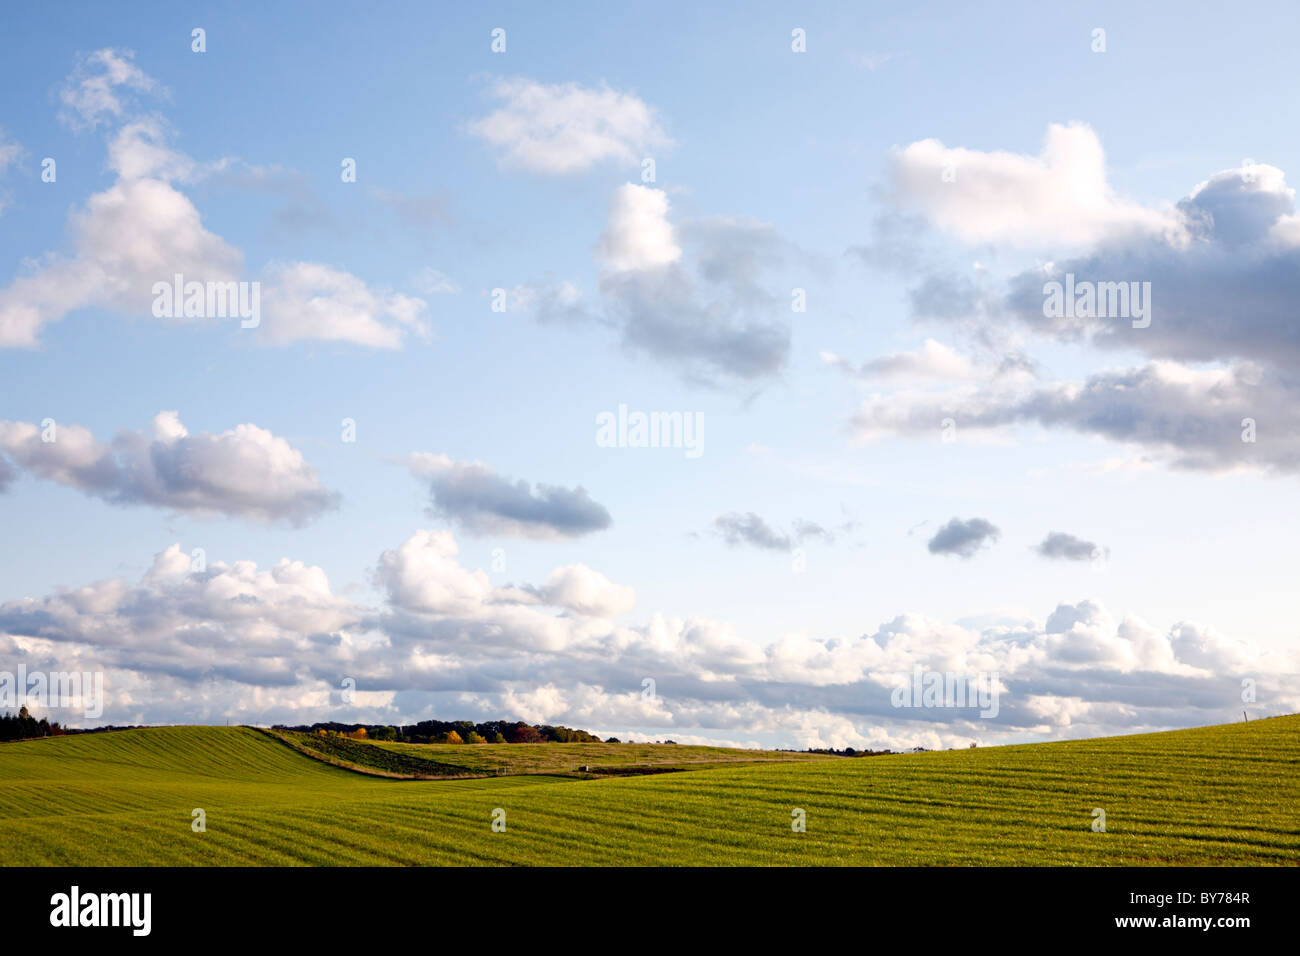 A hilly, rural landscape of ploughed and sowed winter fields and a forest in the background in the Northern Zealand, Denmark. Stock Photo